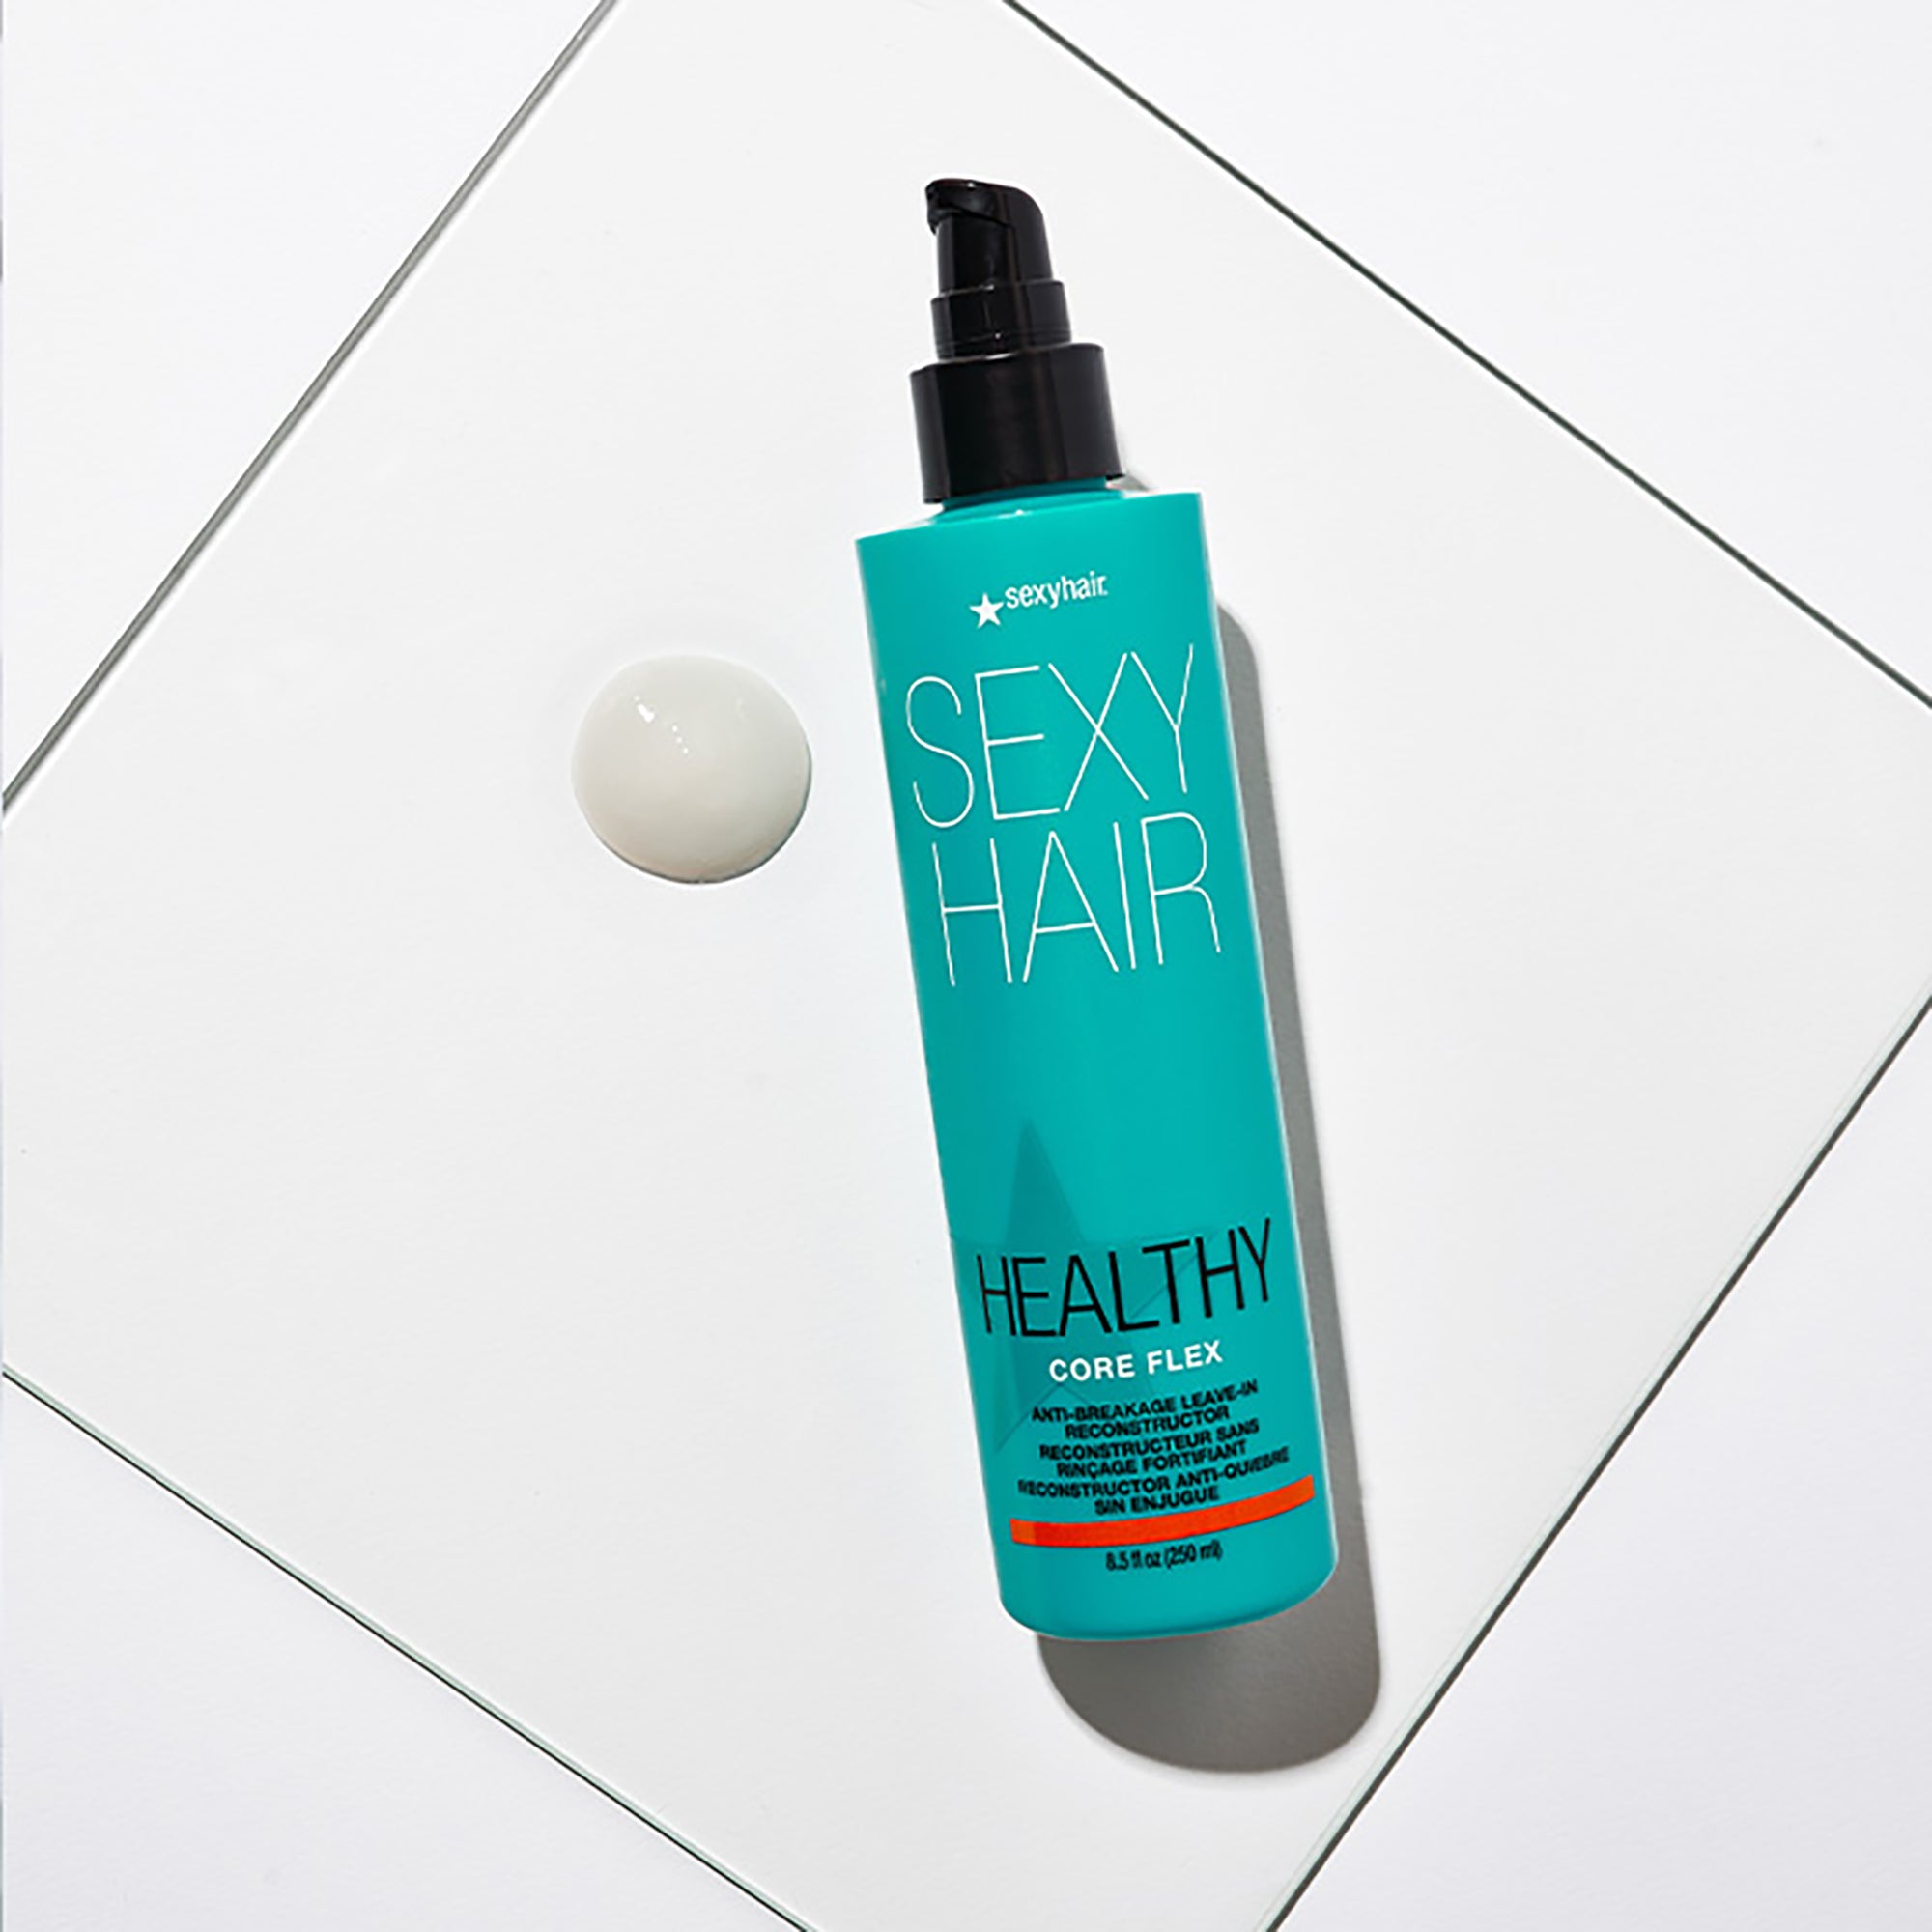 Sexy Hair Healthy SexyHair Core Flex Anti-Breakage Leave-In Reconstructor / 8.5